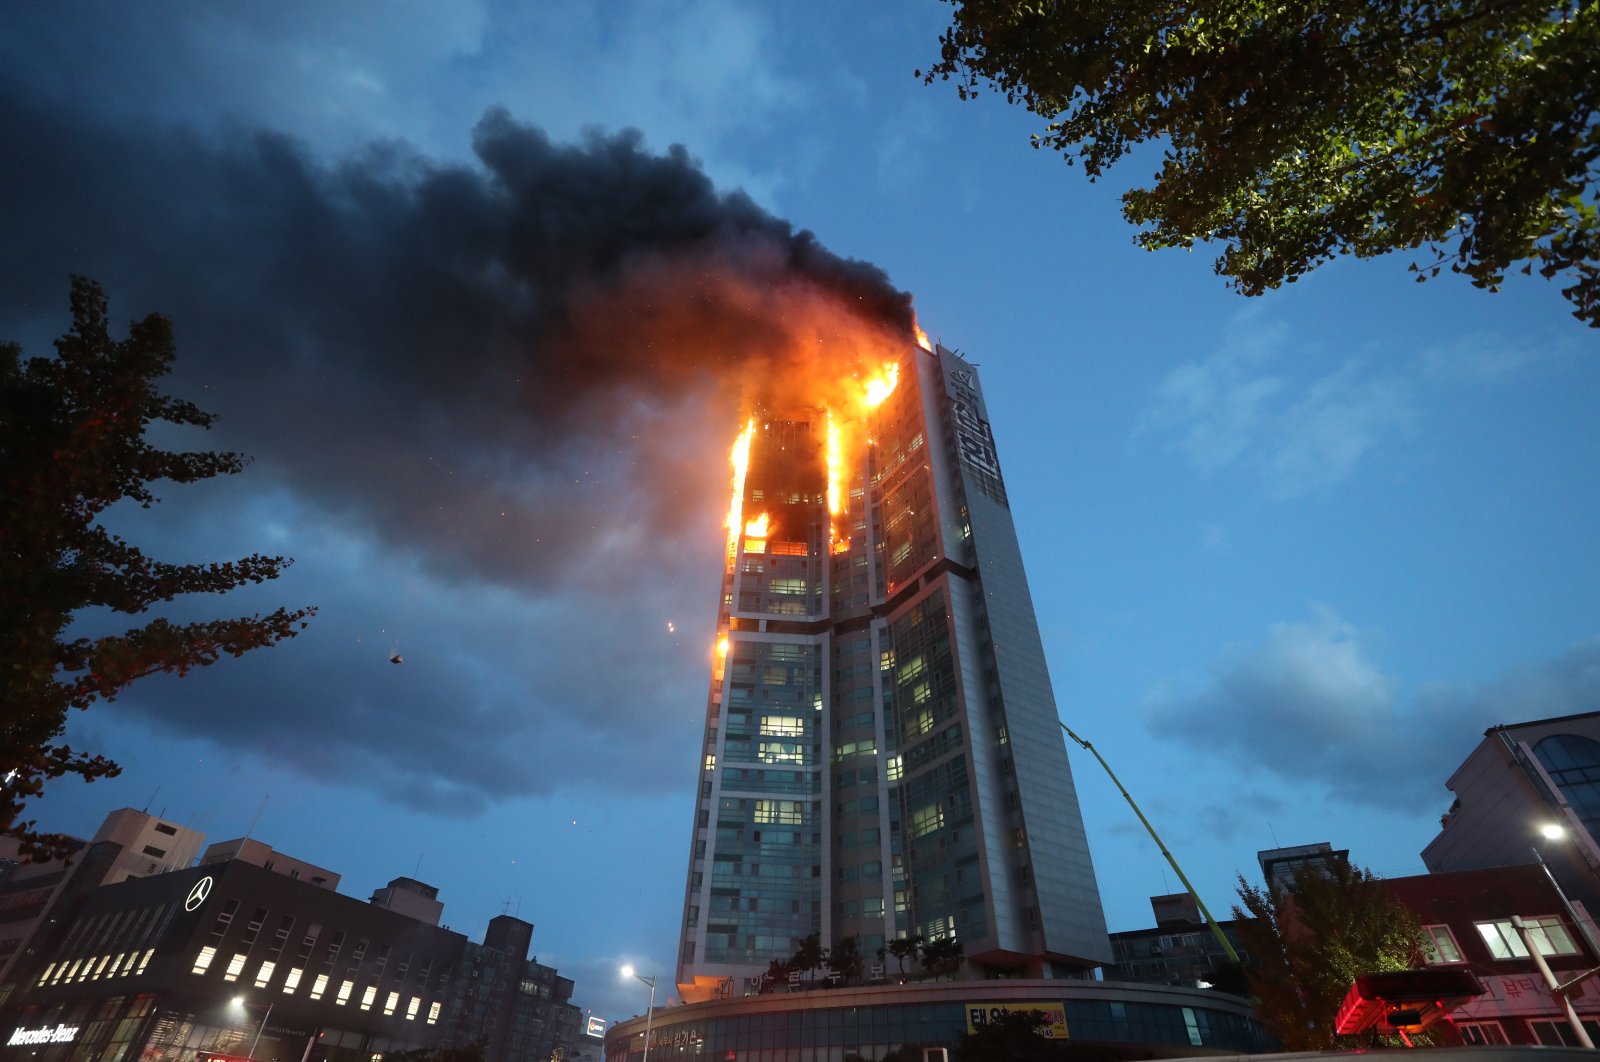 An apartment building is engulfed in a fire in Ulsan, South Korea, Oct. 9, 2020. (Yonhap via AP)